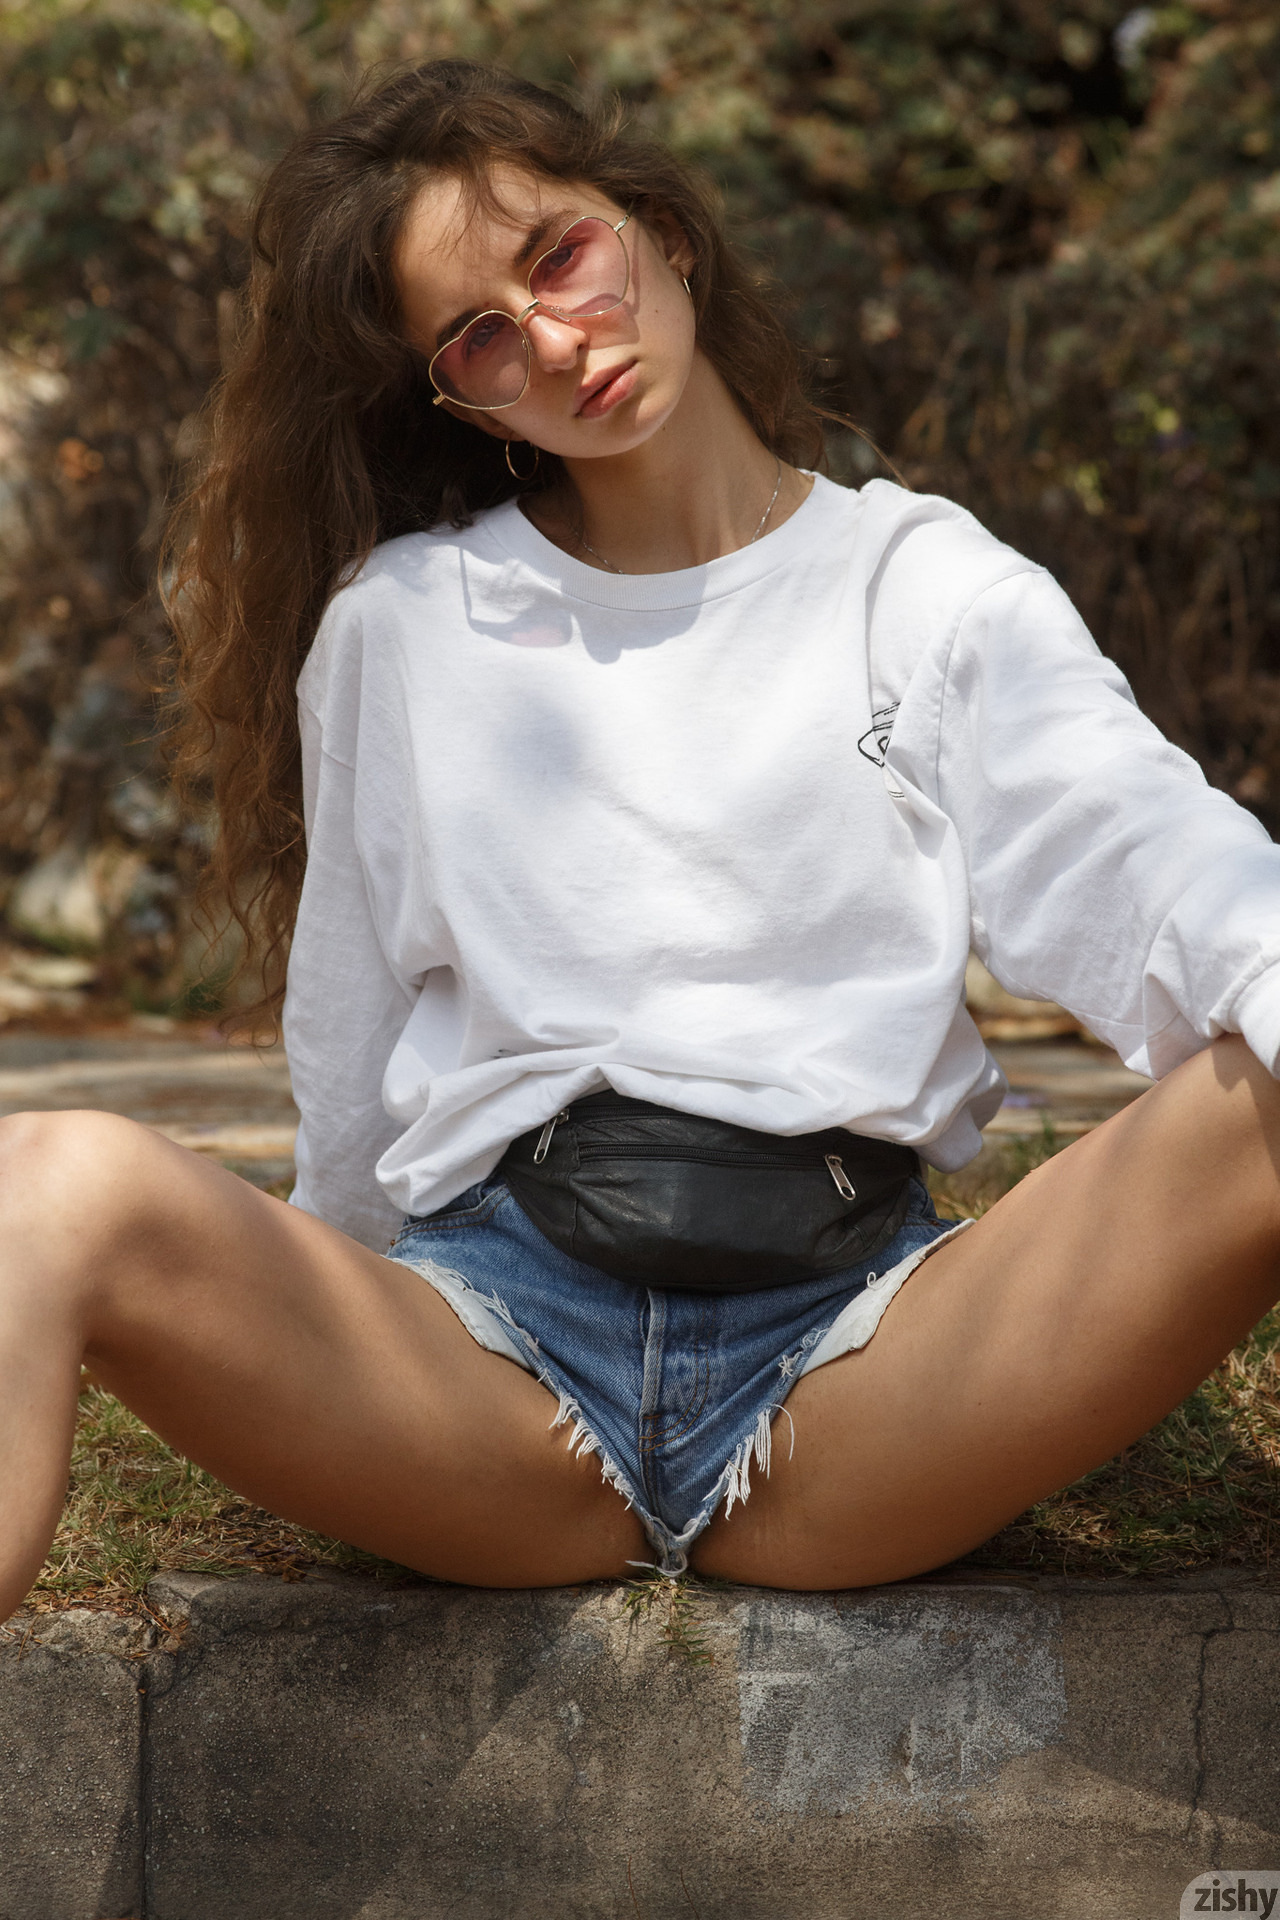 People 1280x1920 Zishy women outdoors jean shorts sunglasses spread legs sitting on the floor white clothing looking at viewer women portrait display brunette